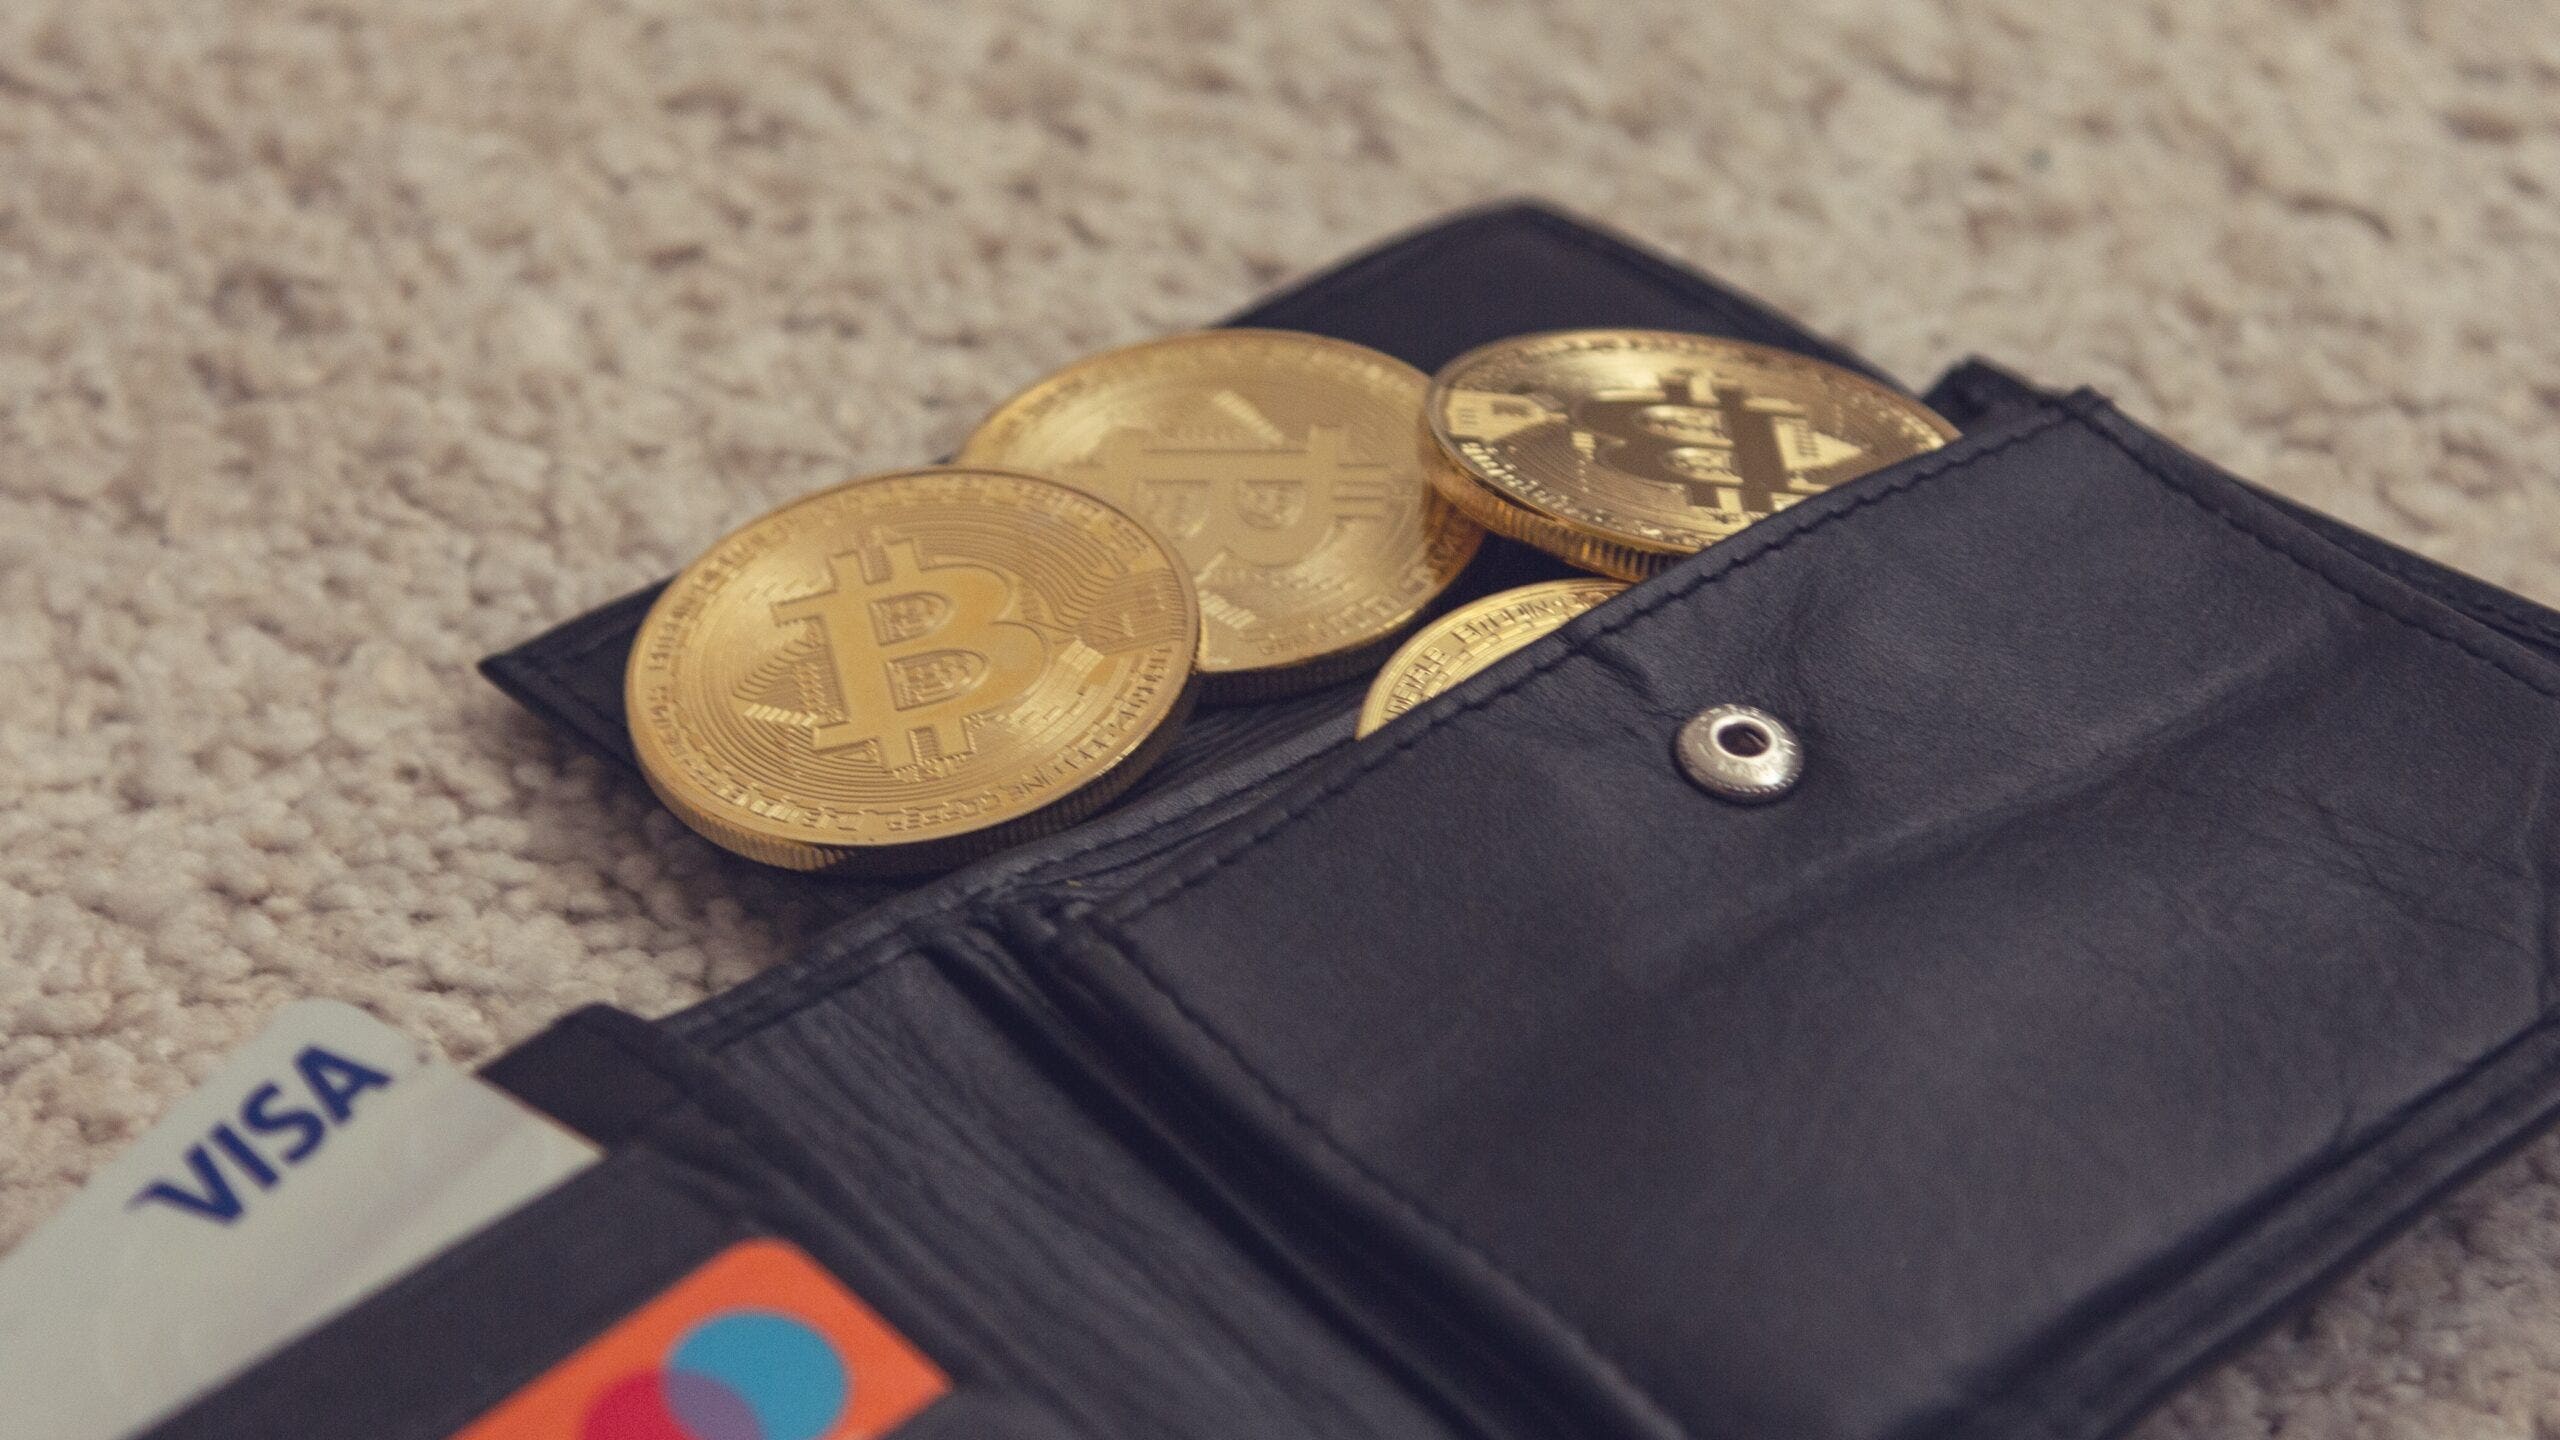 3 Steps to Add Funds to a Bitcoin Wallet